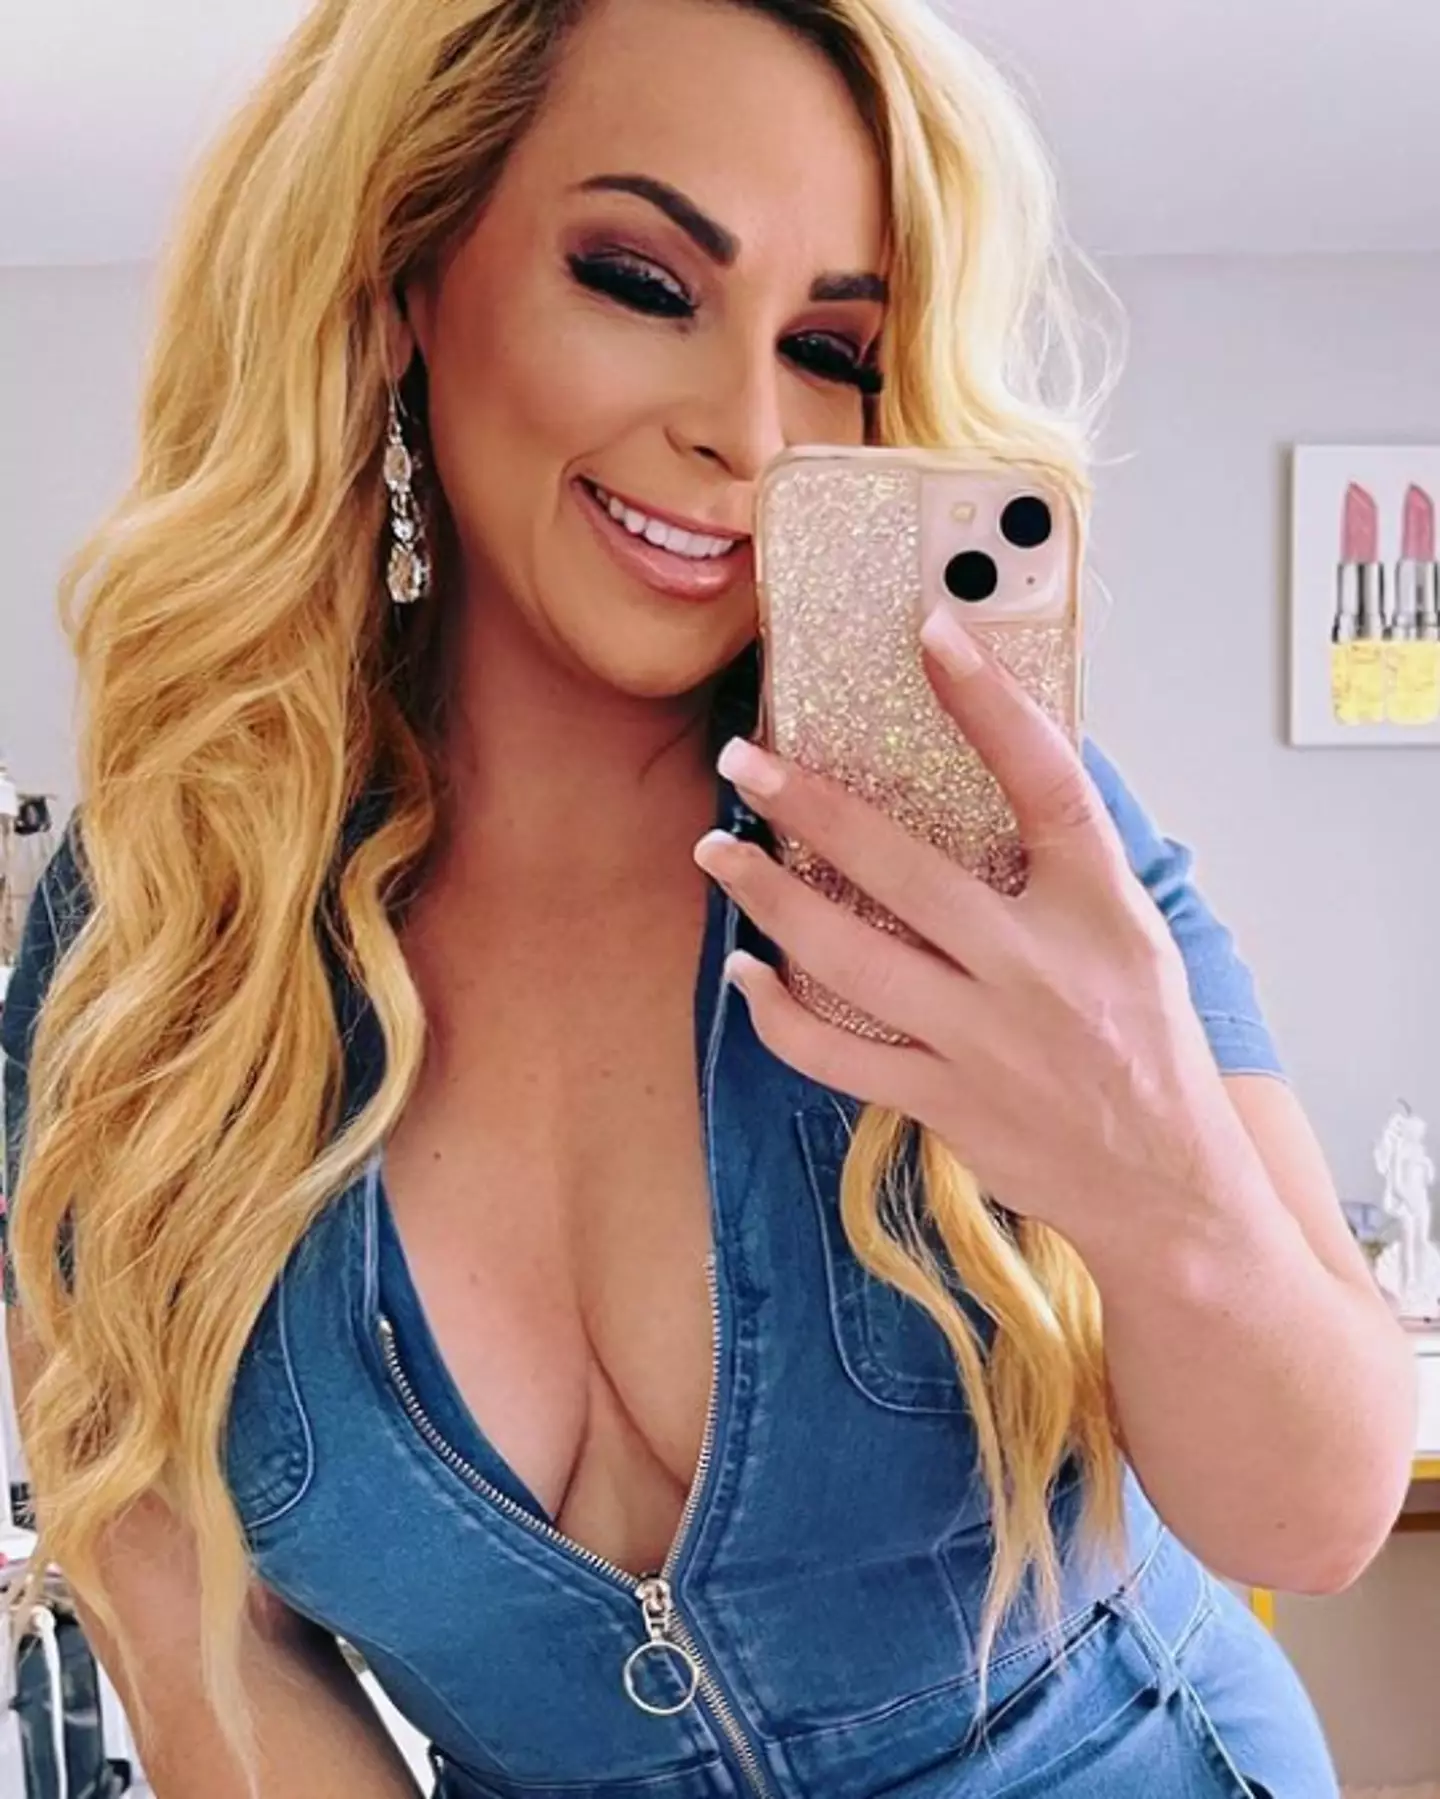 Sarah Juree was fired from her teaching job after posting to OnlyFans.